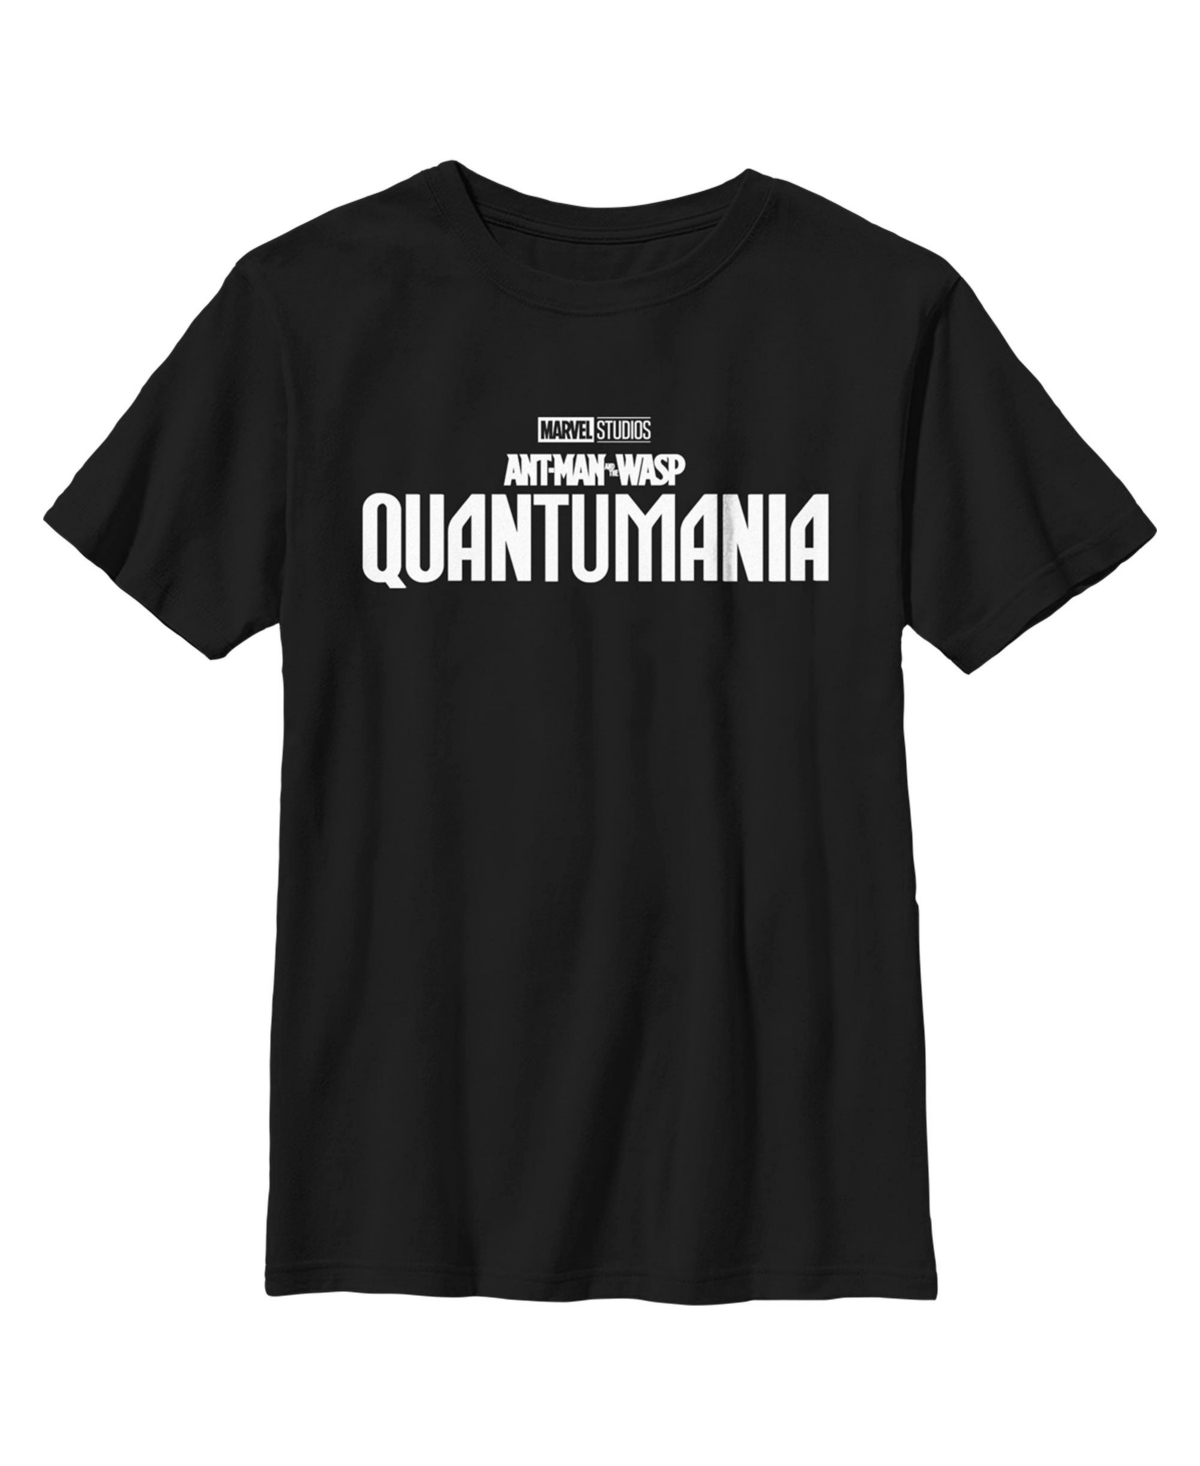 Boy's Ant-Man and the Wasp: Quantumania Movie Logo White Child T-Shirt - Black